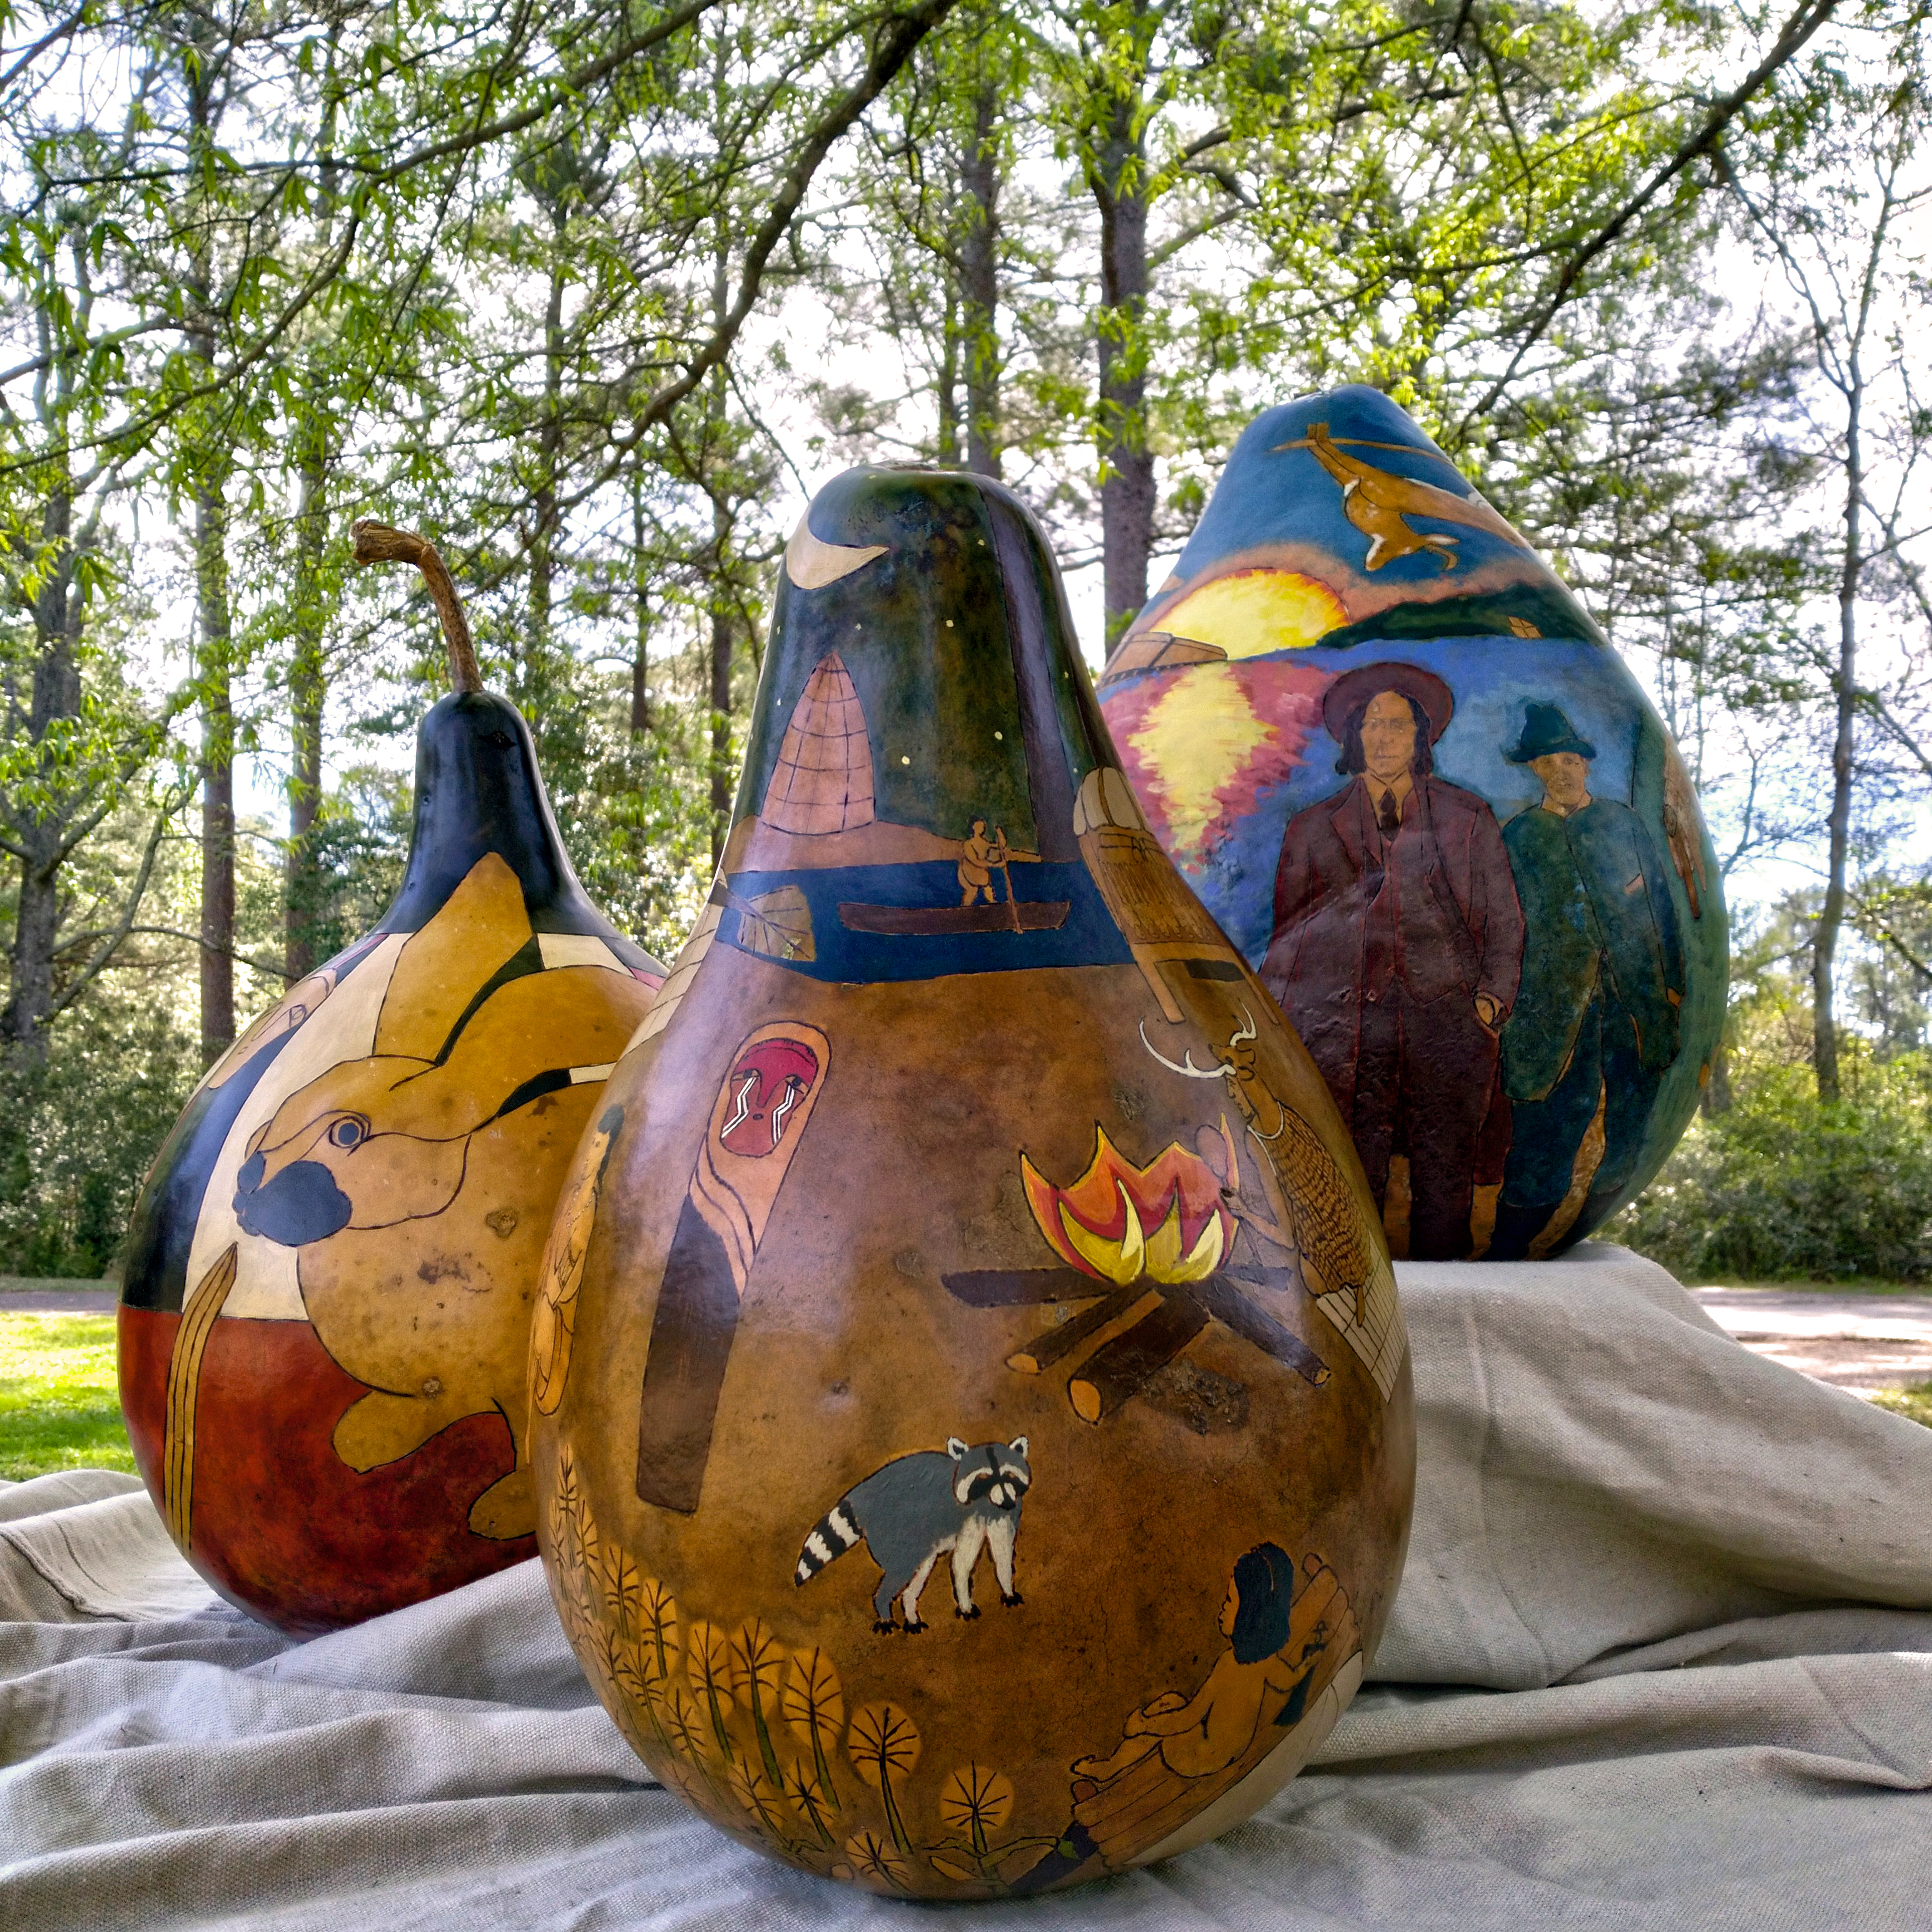 Gourd Art: Telling Stories From Powhatan Culture (U.S. National